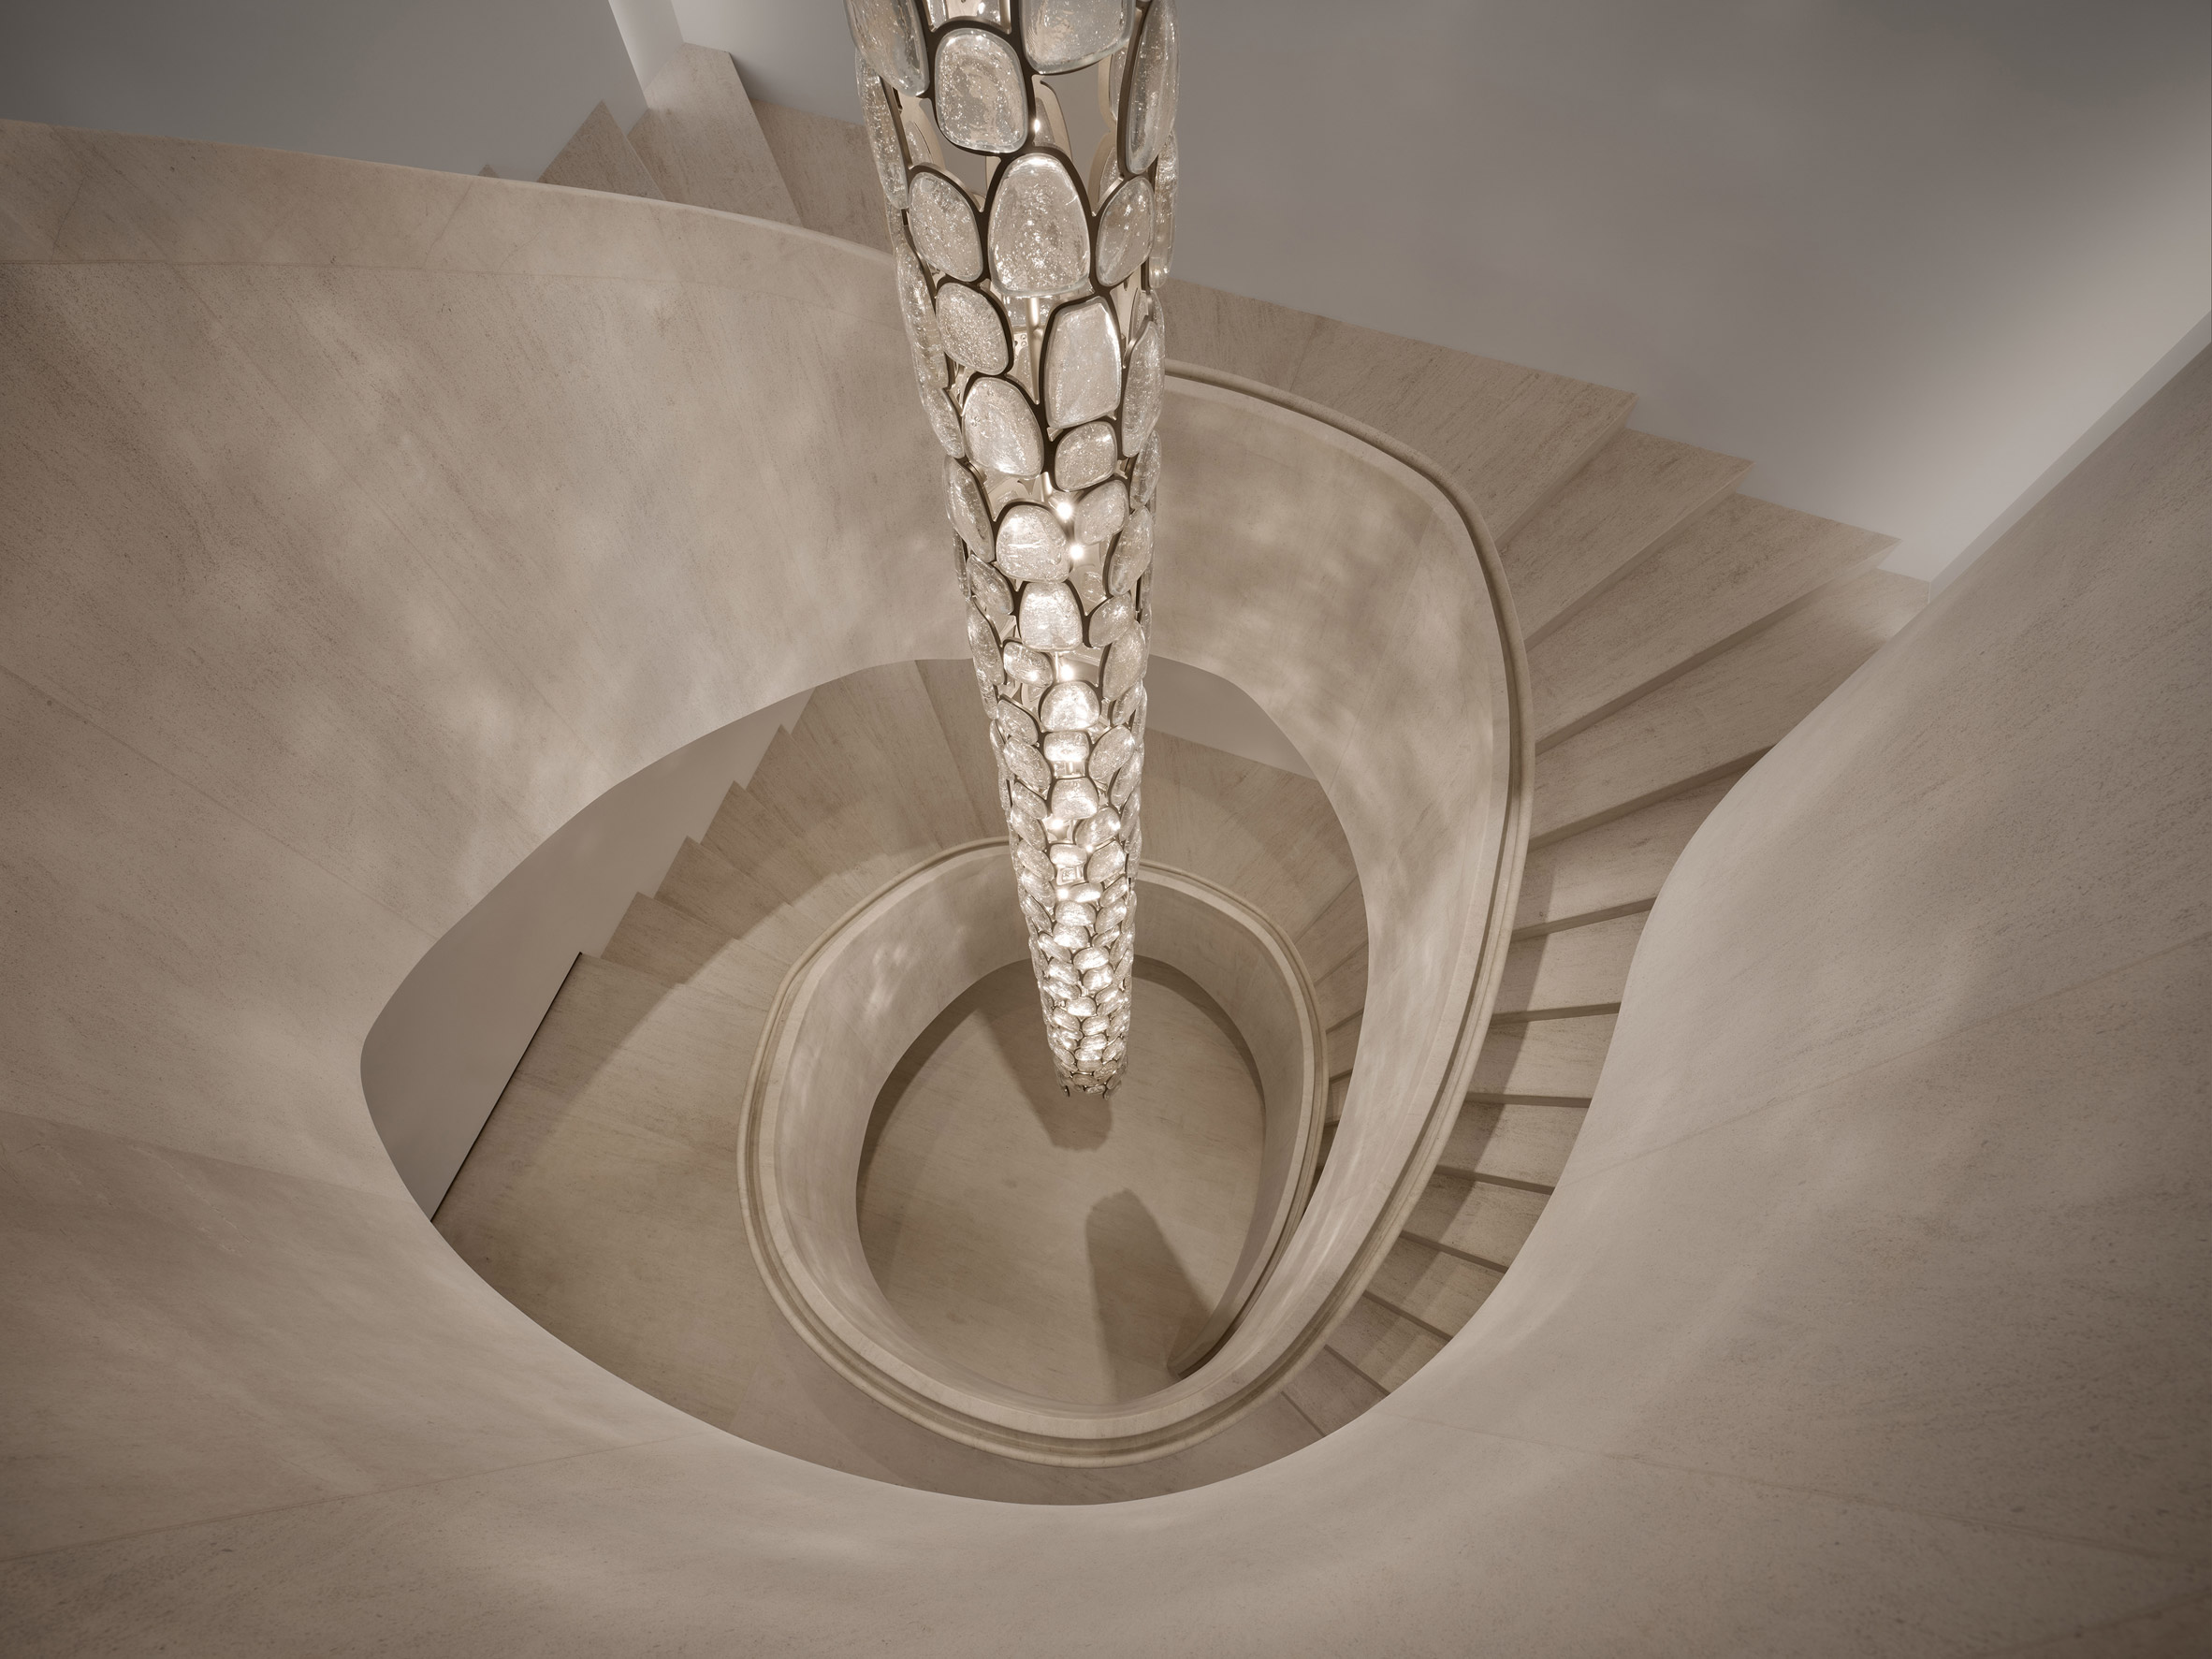 Sinuous limestone staircase surrounds 30-foot glass lighting fixture